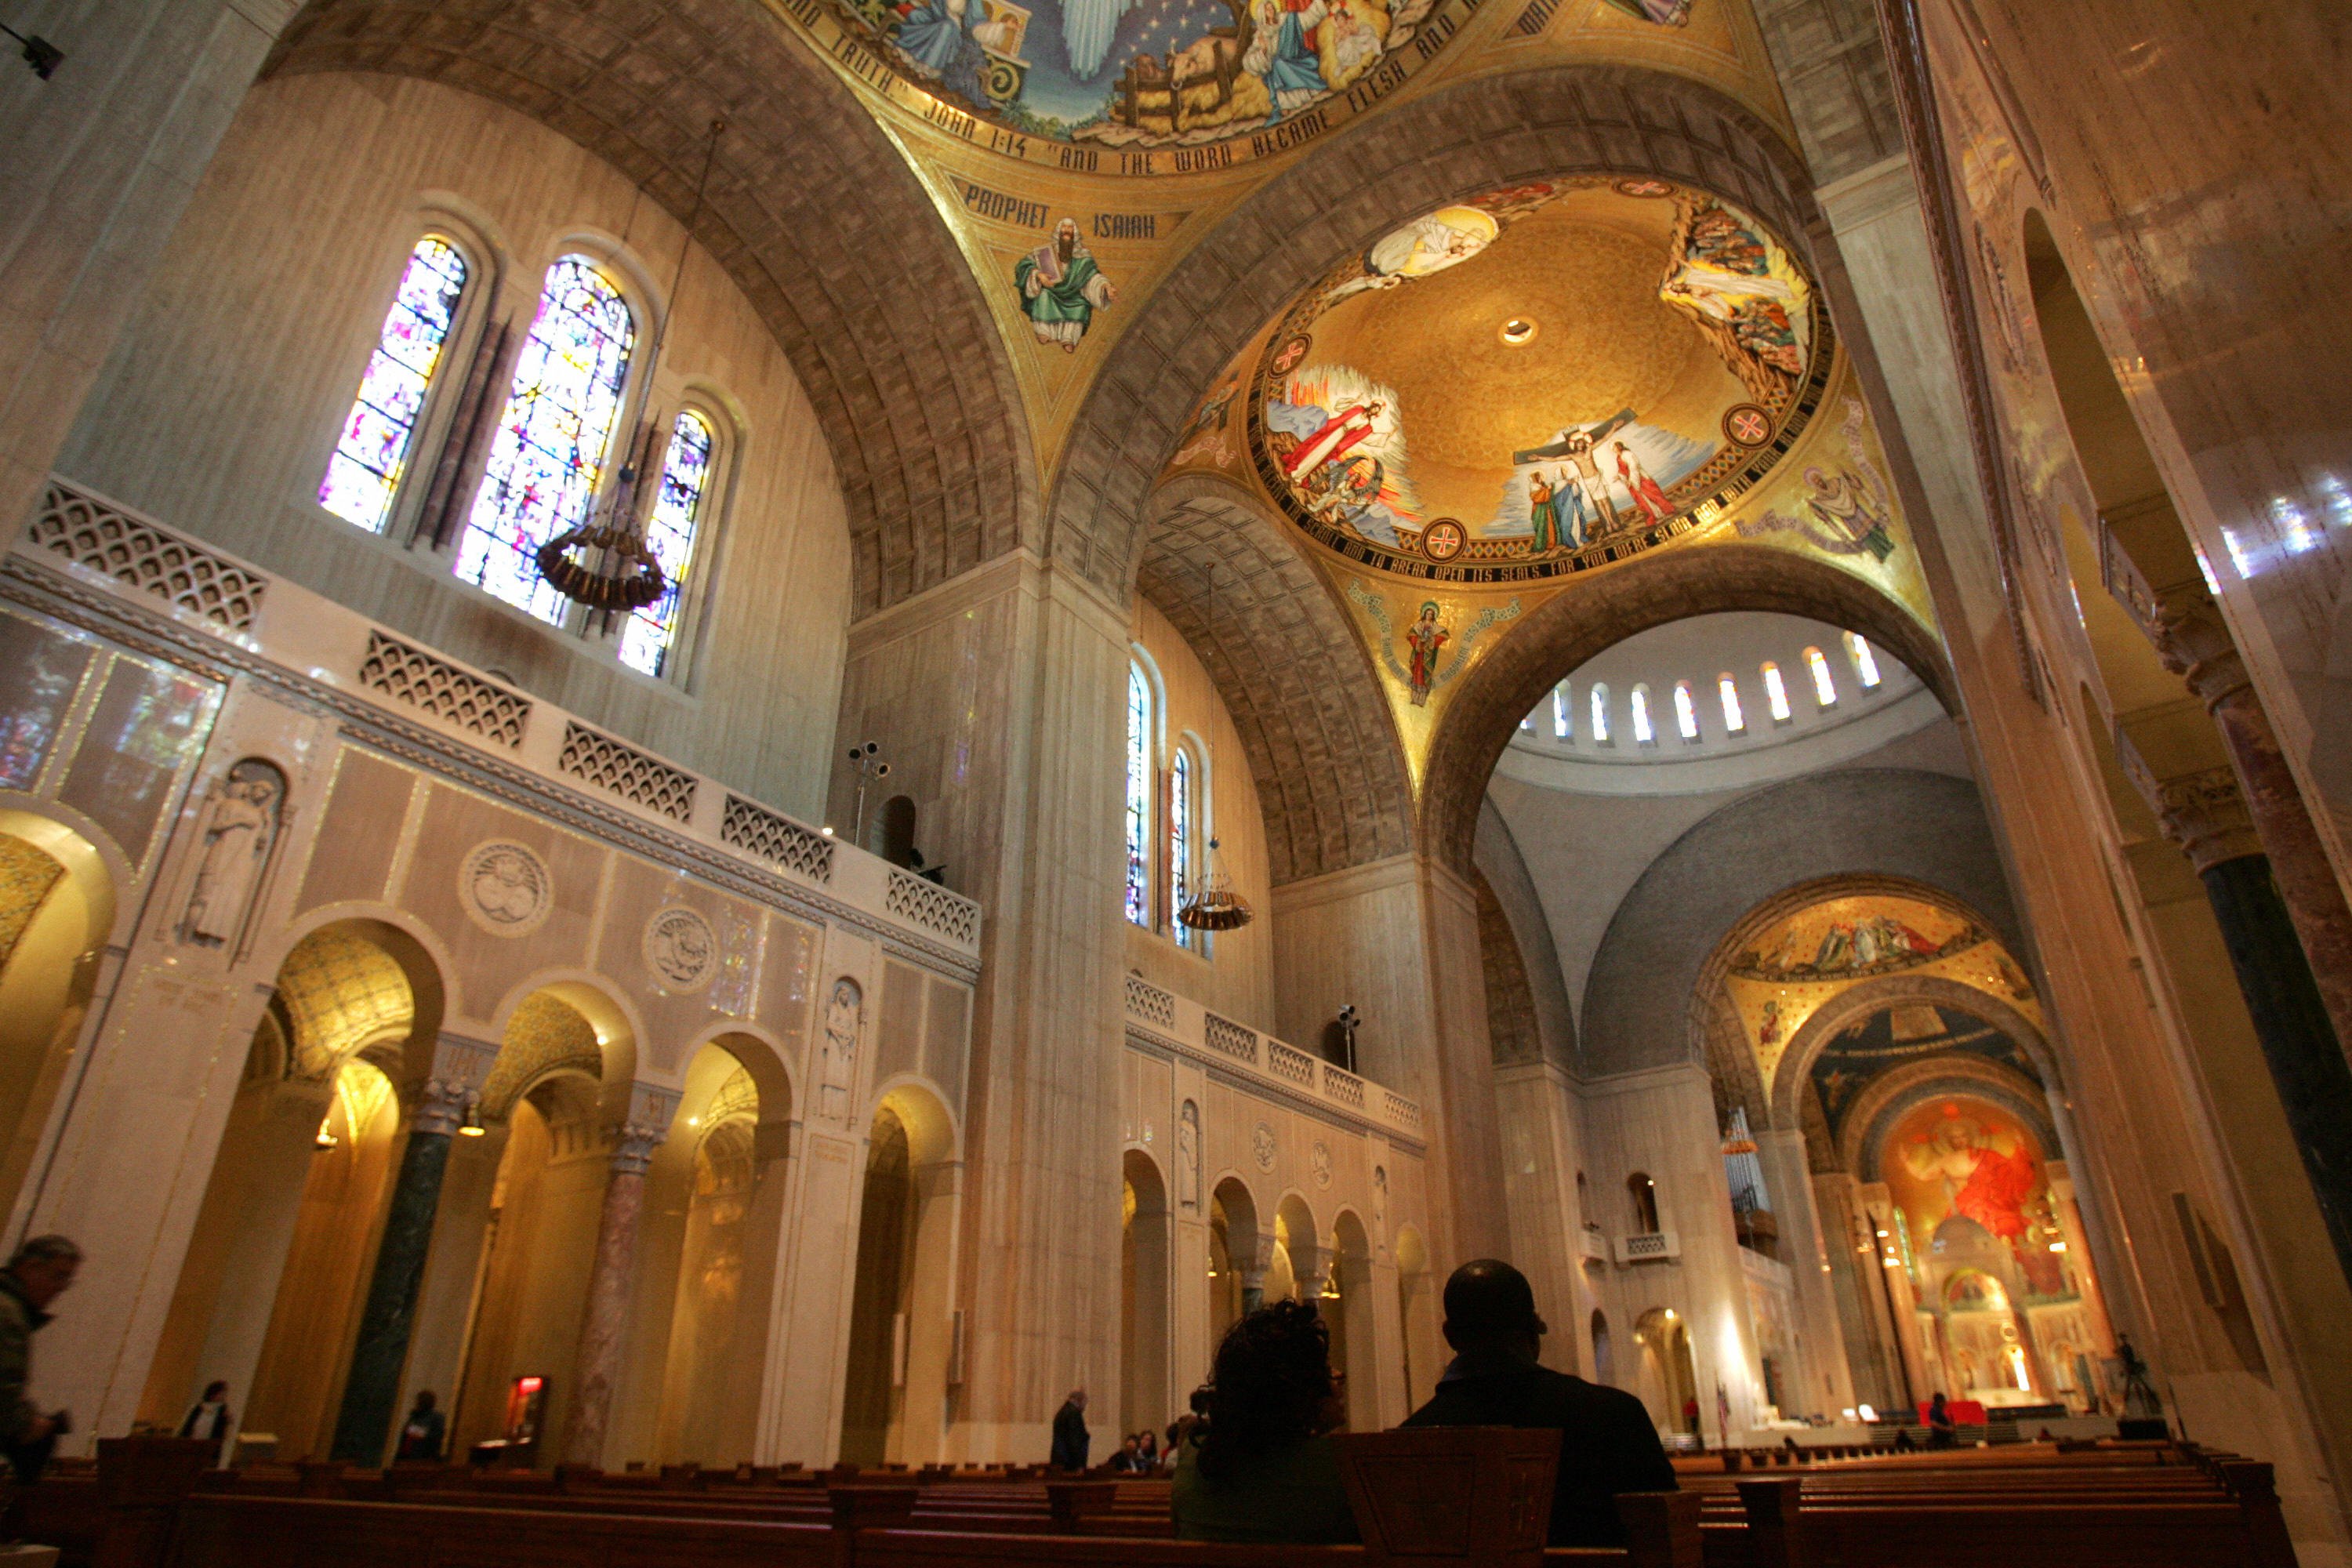 Visitors sit on pews in the Great Upper Church at the Basilica of the National Shrine of the Immaculate Conception on the campus of Catholic University in Washington, DC, on March 21, 2008. Pope Benedict XVI will hold a private prayer service and meeting with the 350 bishops of the United States at the Basilica as he makes his first official visit to the United States next month when he travels to New York and Washington, DC. AFP PHOTO/SAUL LOEB (Photo credit should read SAUL LOEB/AFP/Getty Images)